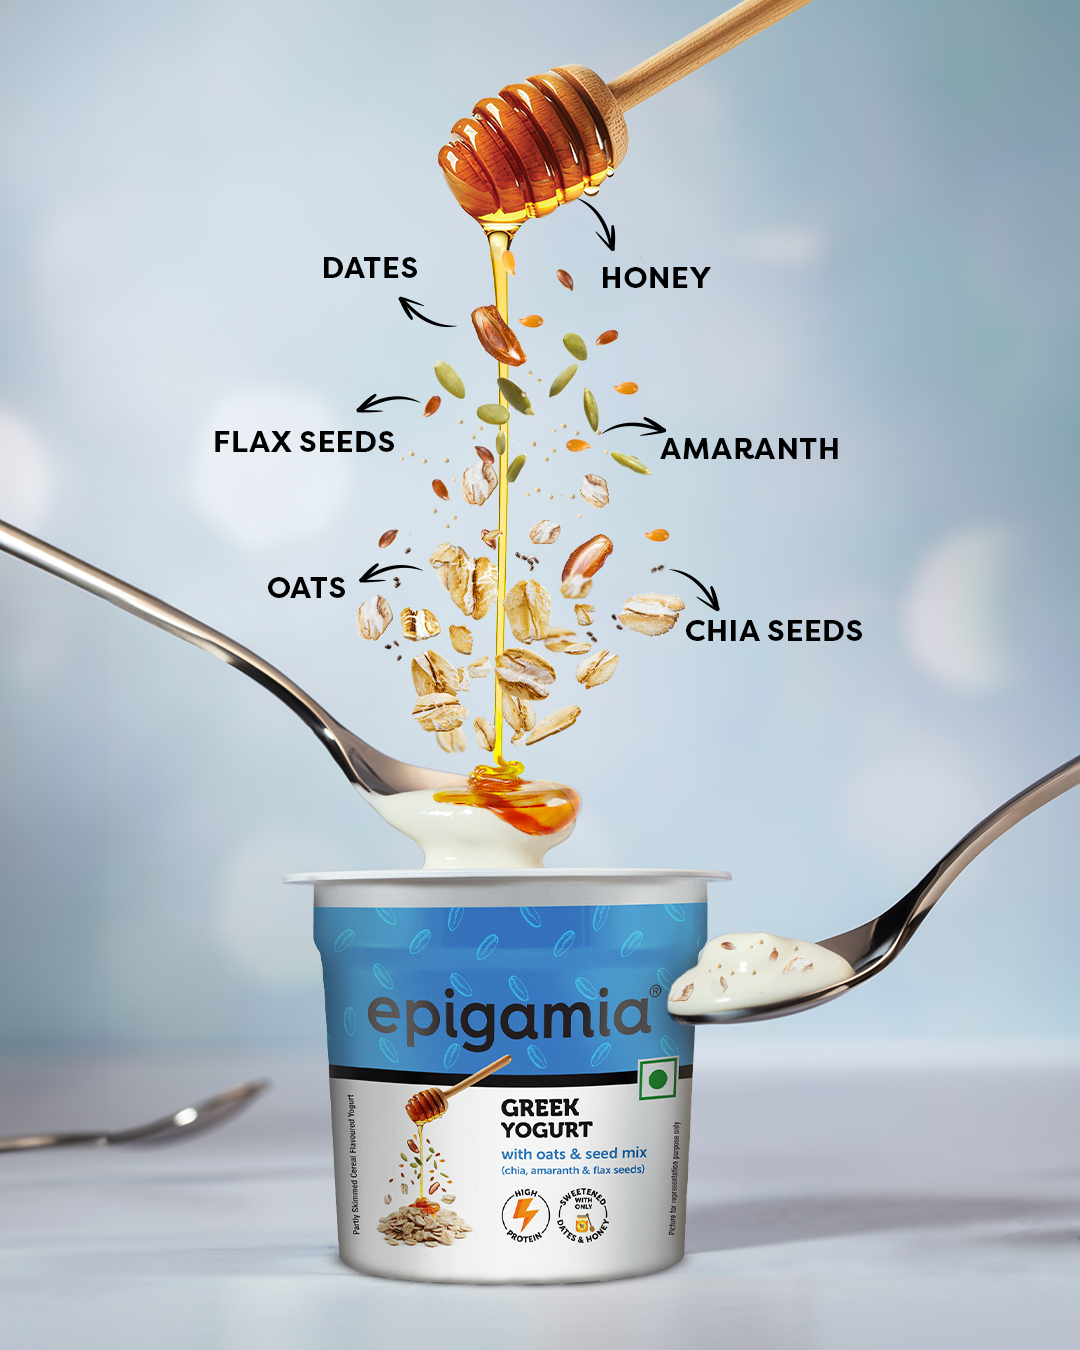 Epigamia  launches Greek Yogurt loaded with Oats & Seed Mix